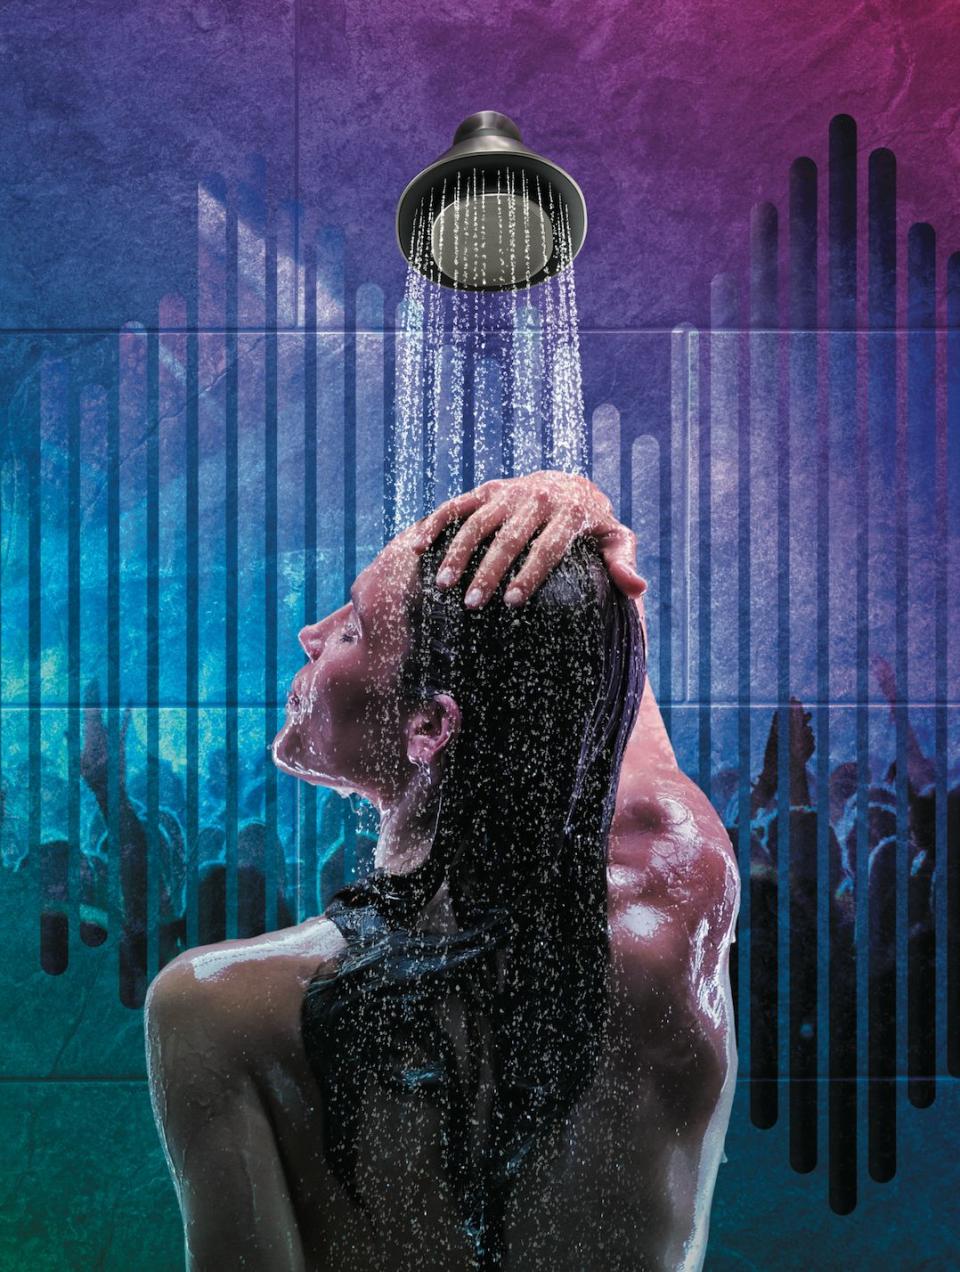 Used to be that people sang in the shower. But thanks to <a href="https://www.smarthome.kohler.com/smart-shower-speaker-moxie" target="_blank" rel="noopener noreferrer">this showerhead that includes Bluetooth,</a> your shower now sings to you.